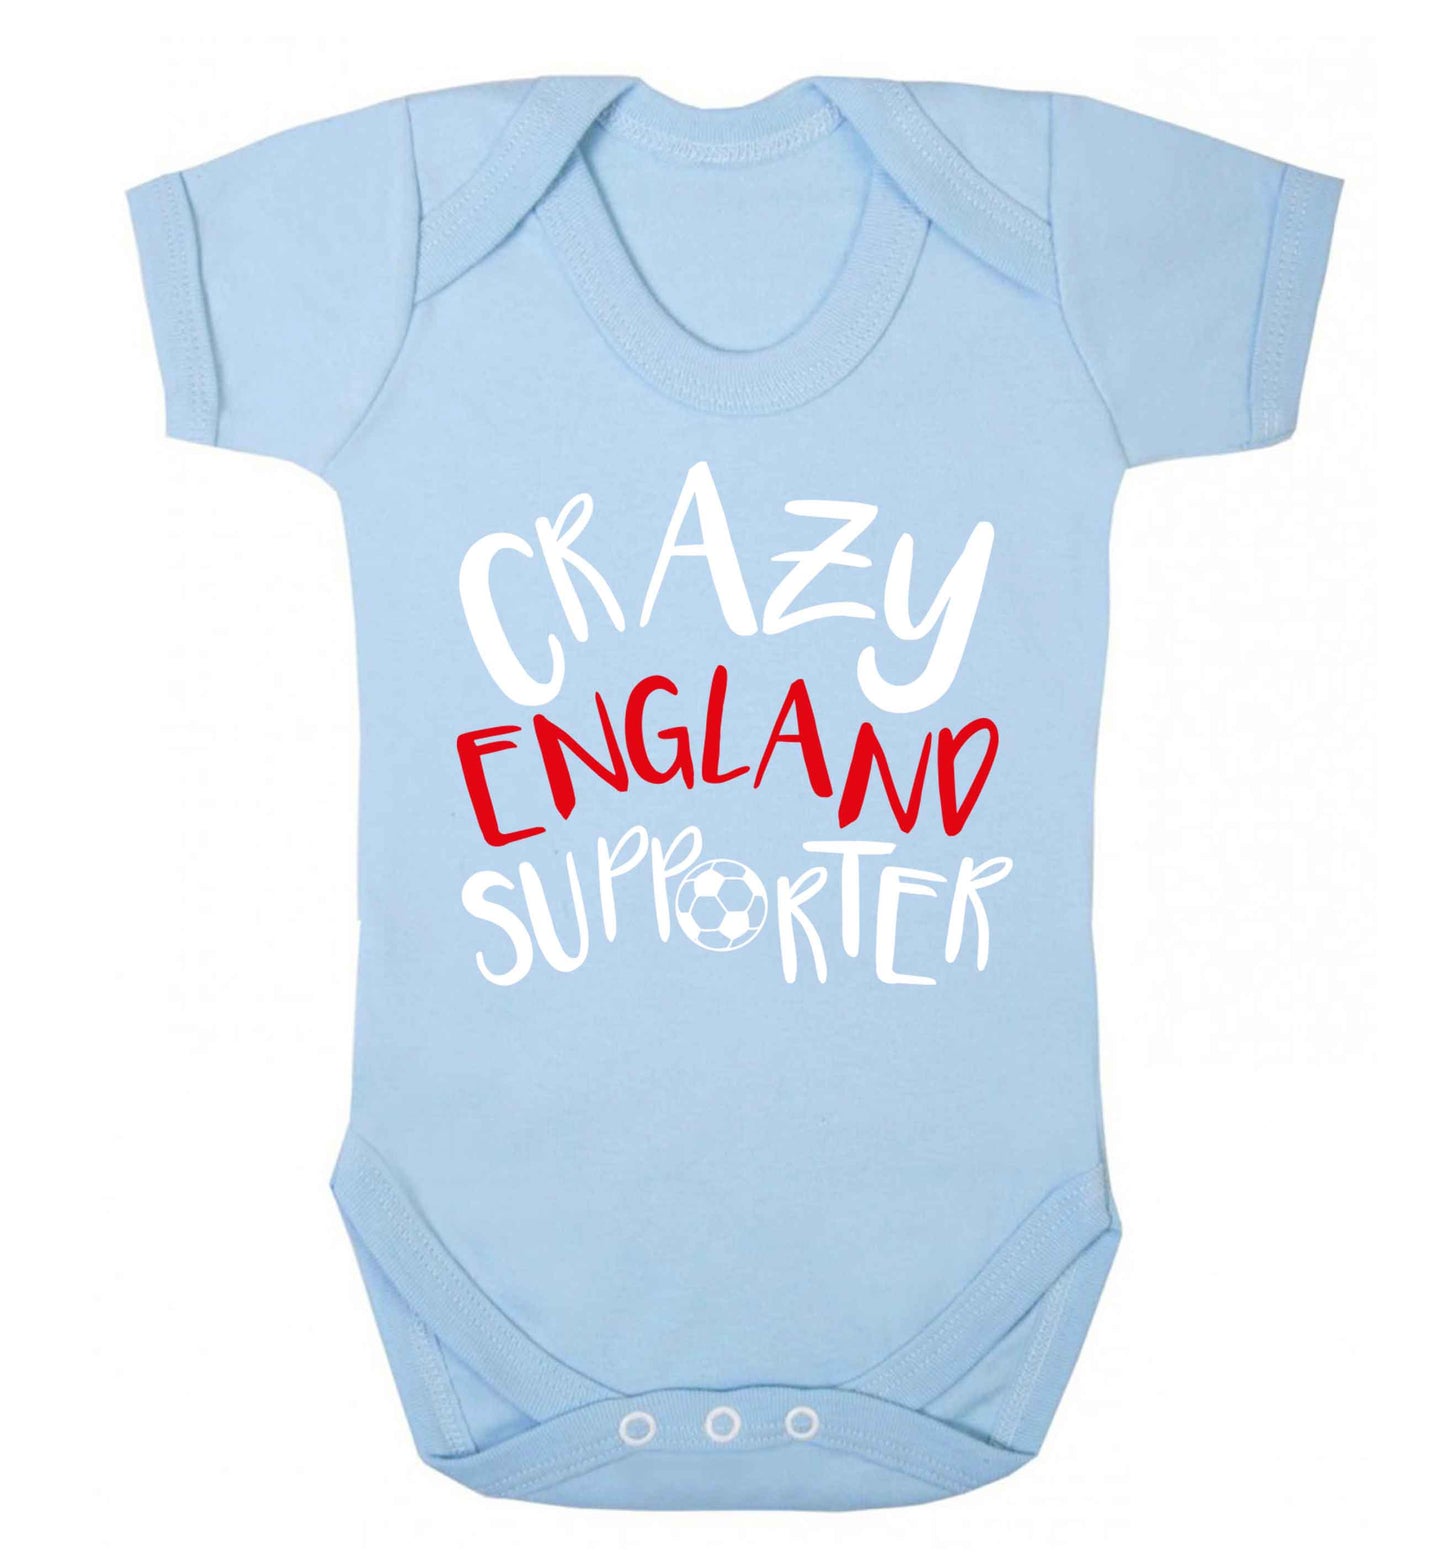 Crazy England supporter Baby Vest pale blue 18-24 months